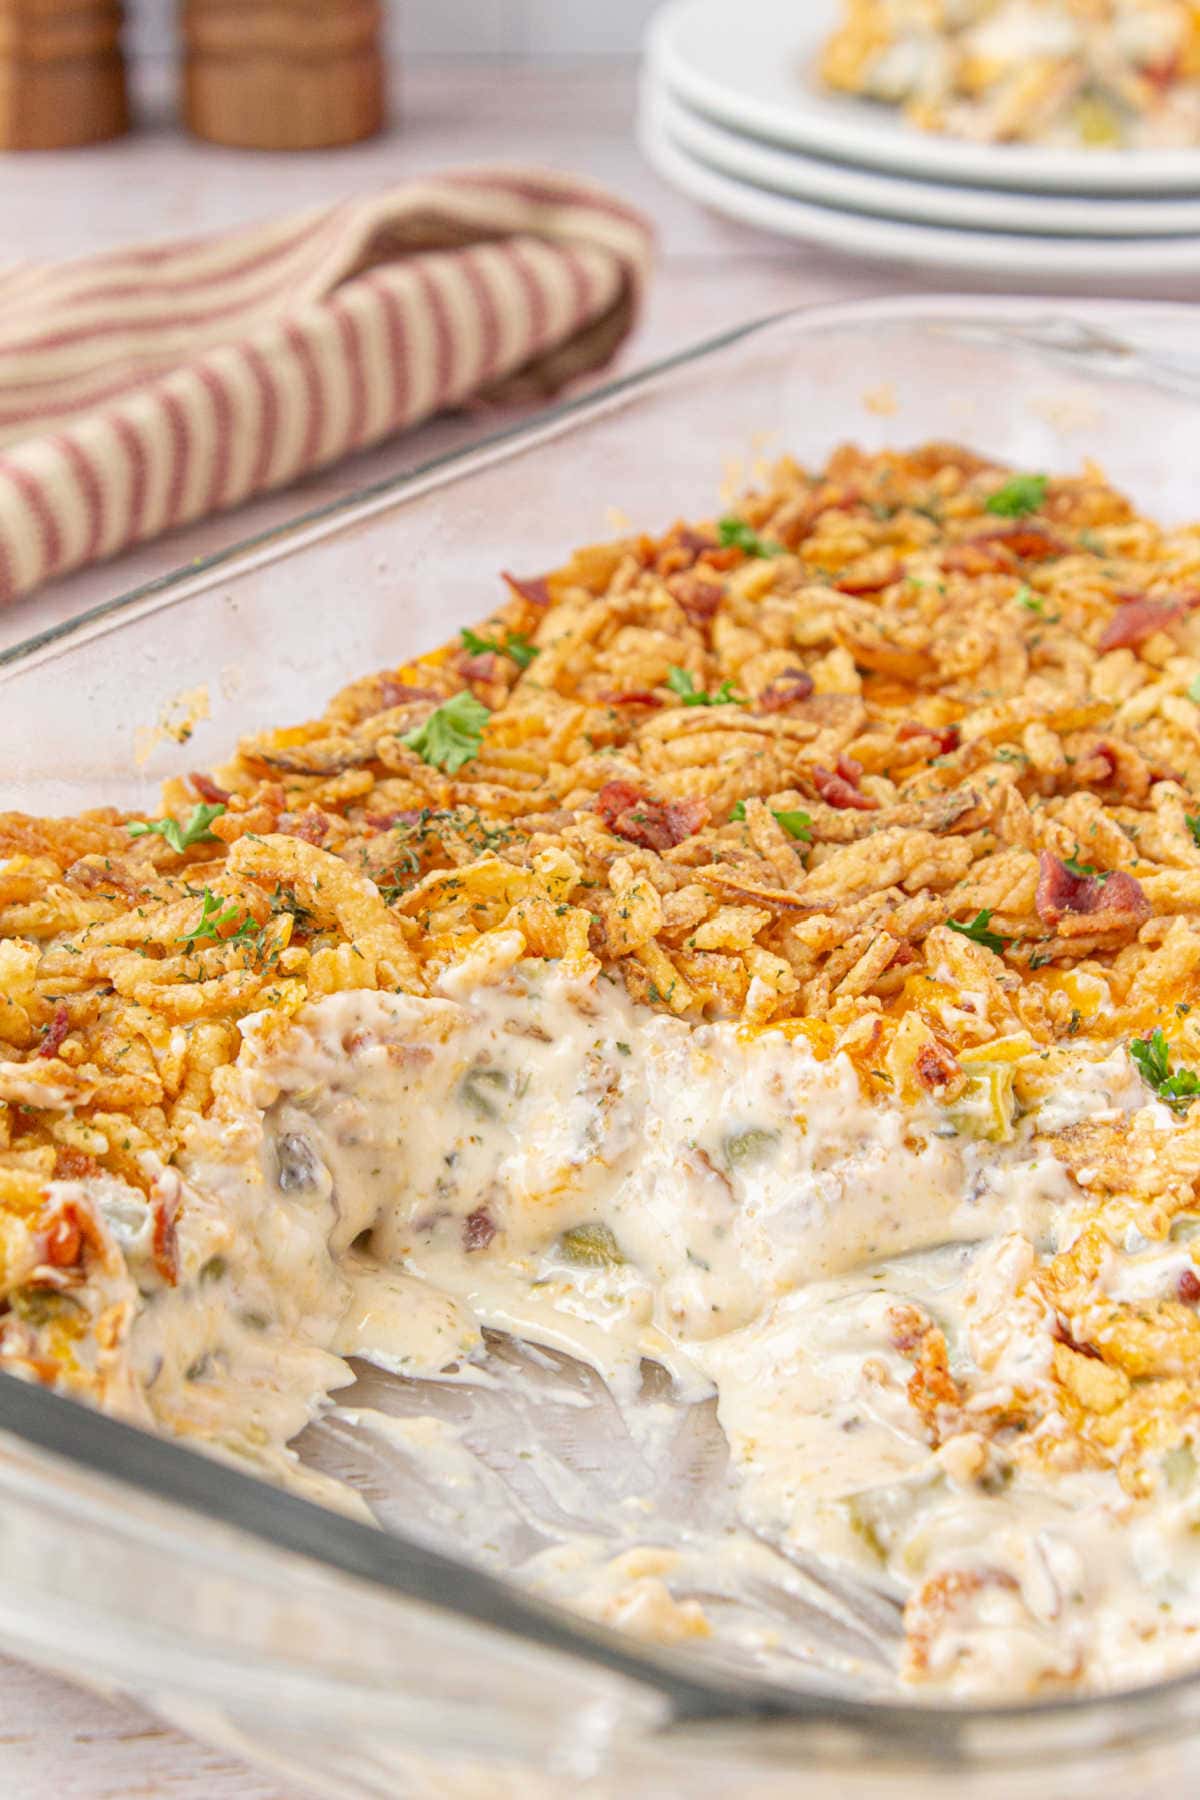 Casserole in a glass baking dish with crispy fried onions on top.